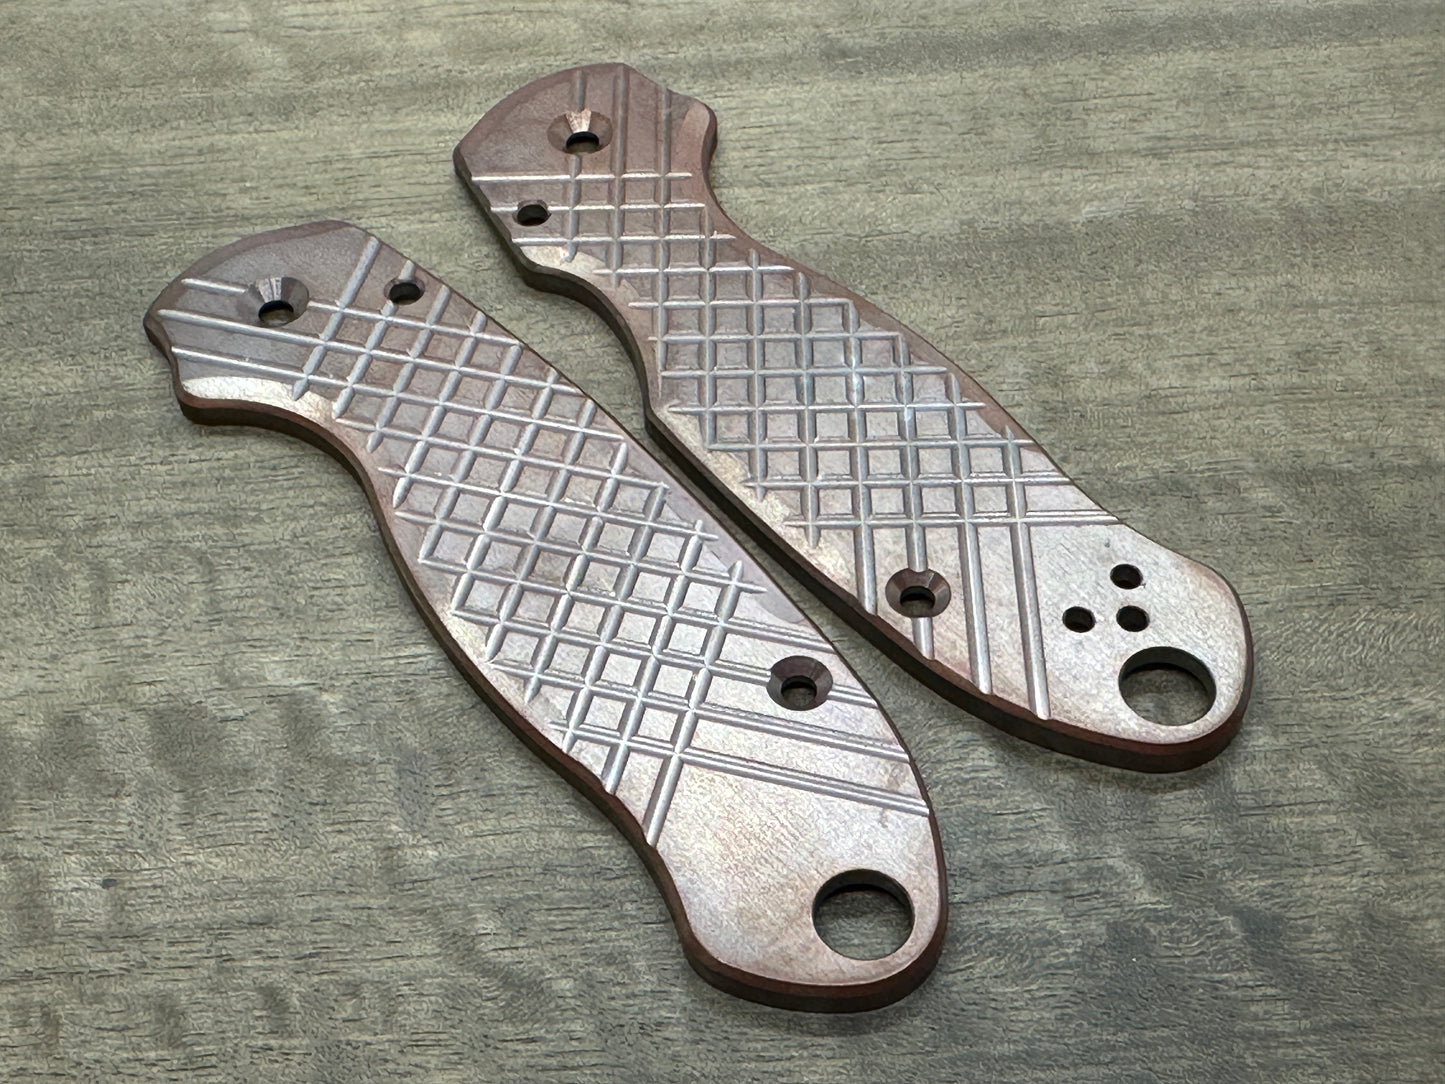 FRAG Cnc milled Dark Copper Scales for Spyderco Para 3